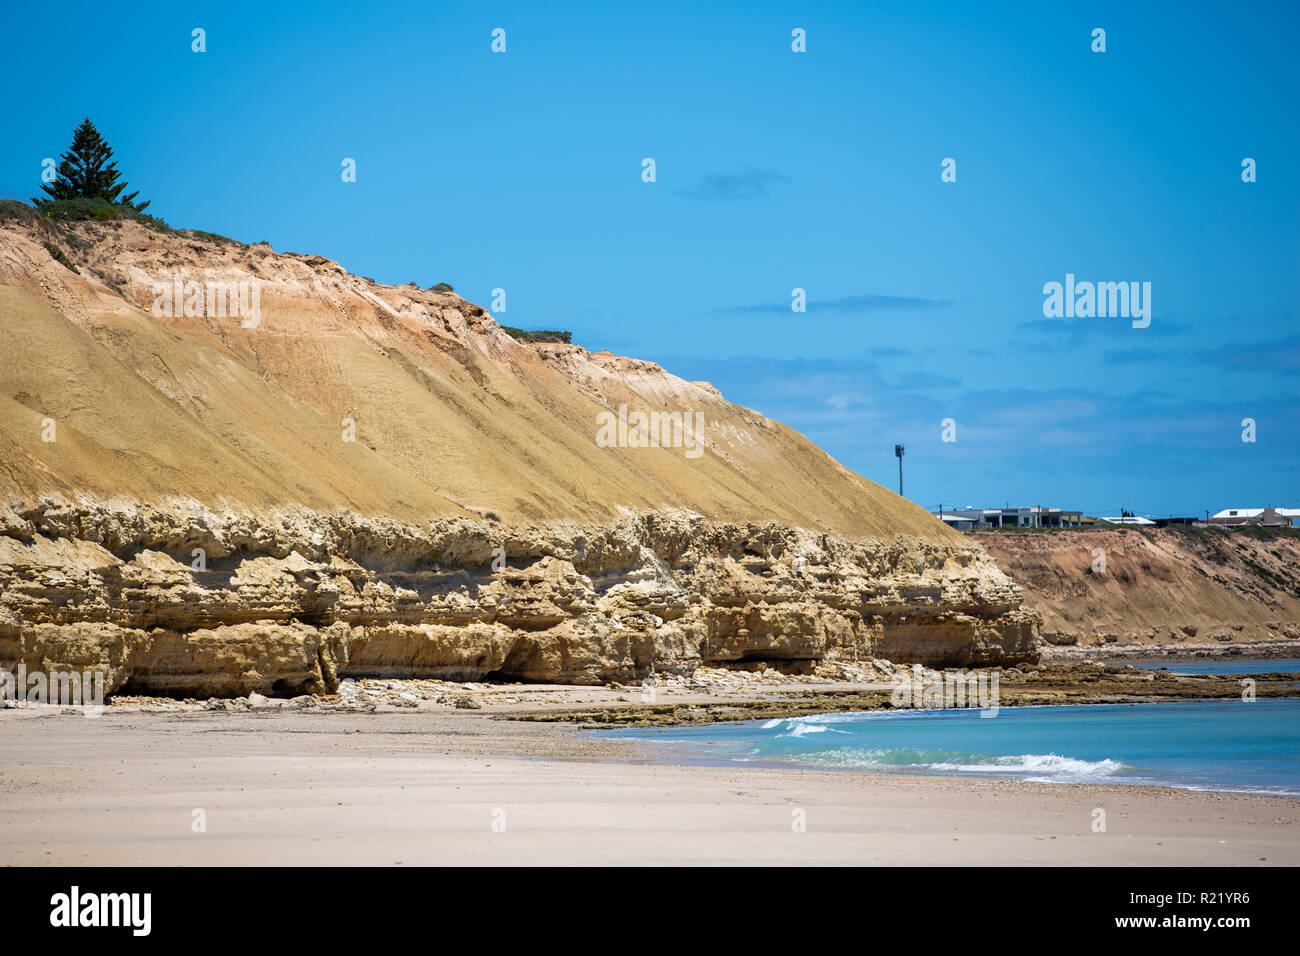 The beautiful Port Willunga beach with turquoise waters on a calm sunny day on 15th November 2018 Stock Photo